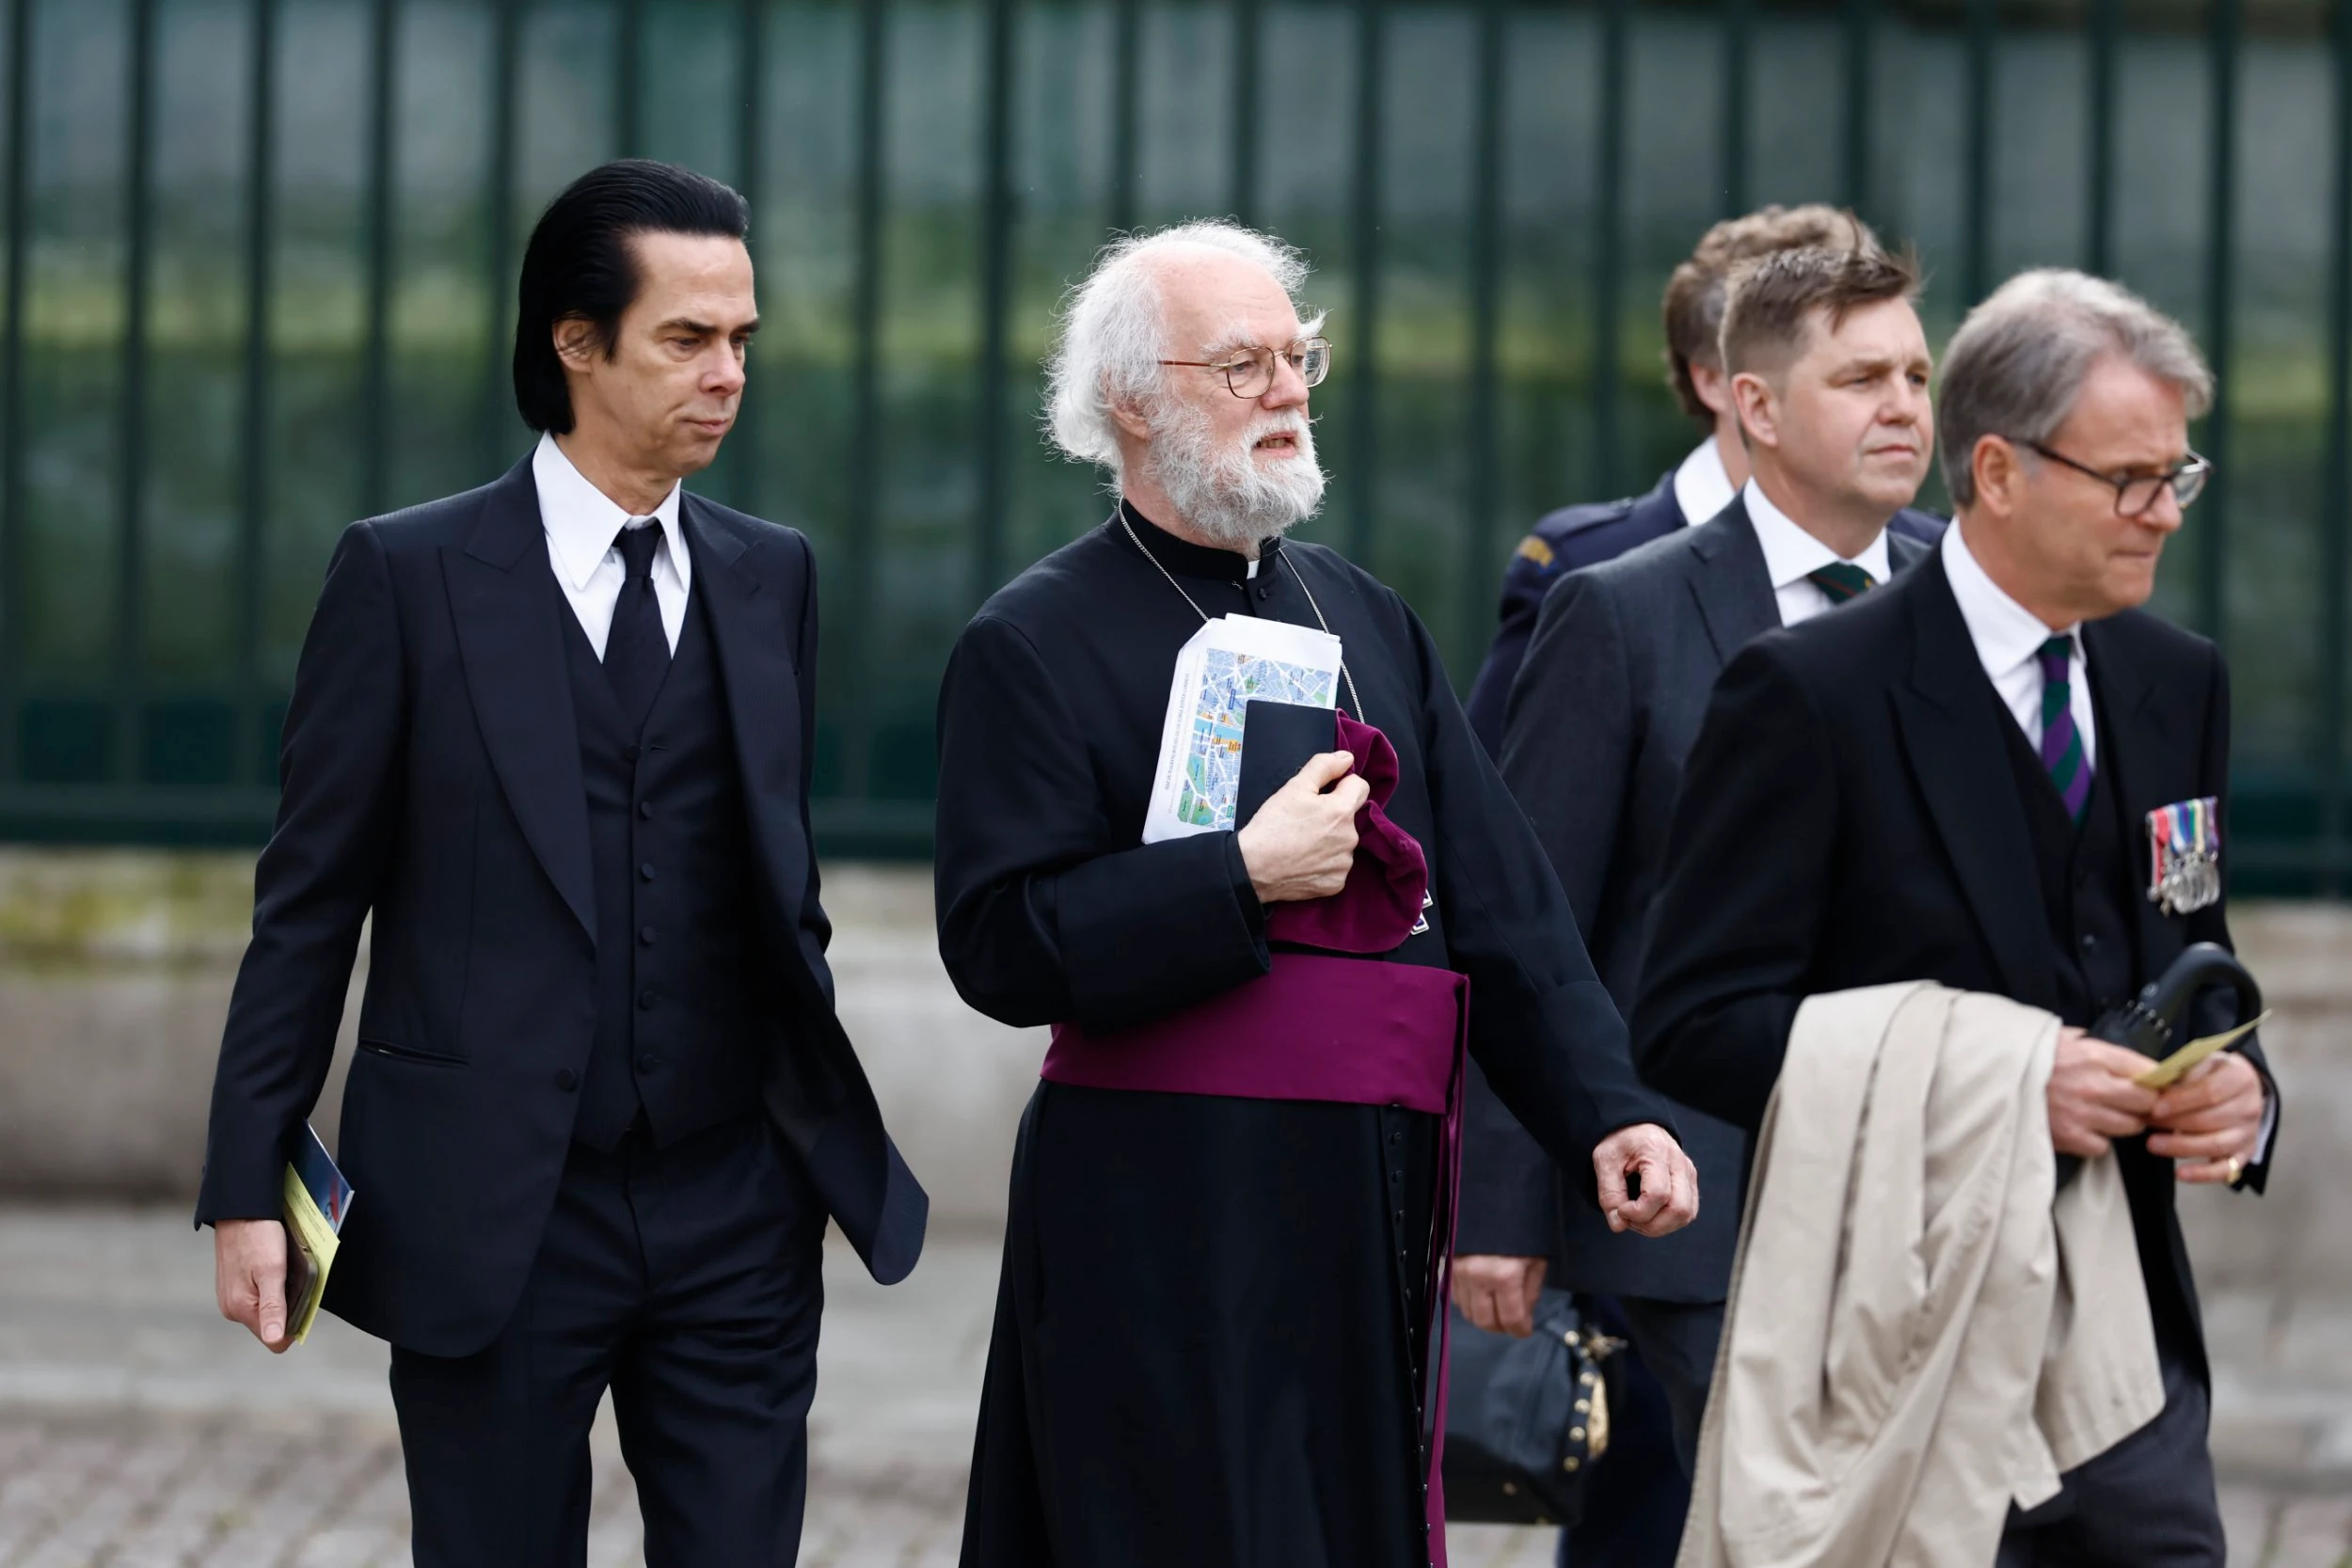 Nick Cave arrival at the ceremony (Credits: Metro UK)